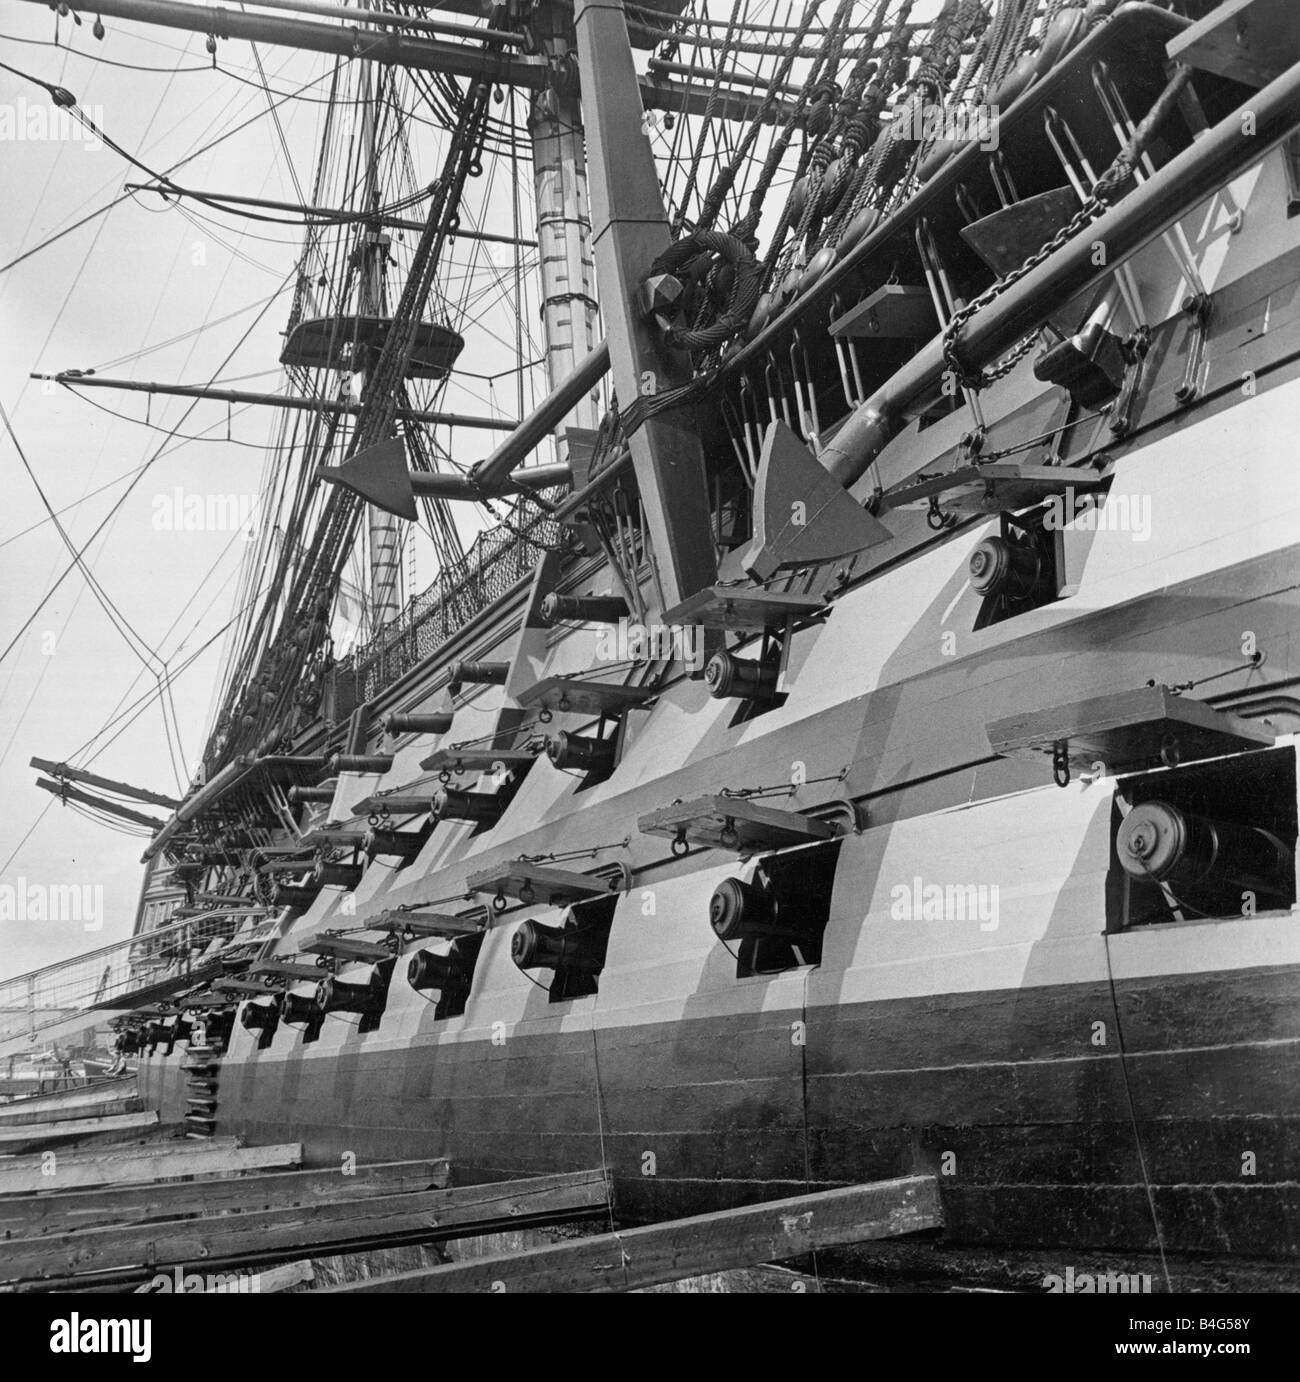 HMS Victory the Battle of Trafalgar flagship of Lord Nelson Gun ports raised the Victory s cannon peer out on the starboard side These guns naturally had no modern recoil springs and had to be dragged back with blocks and tackle every time they were fired circa 1975 Stock Photo